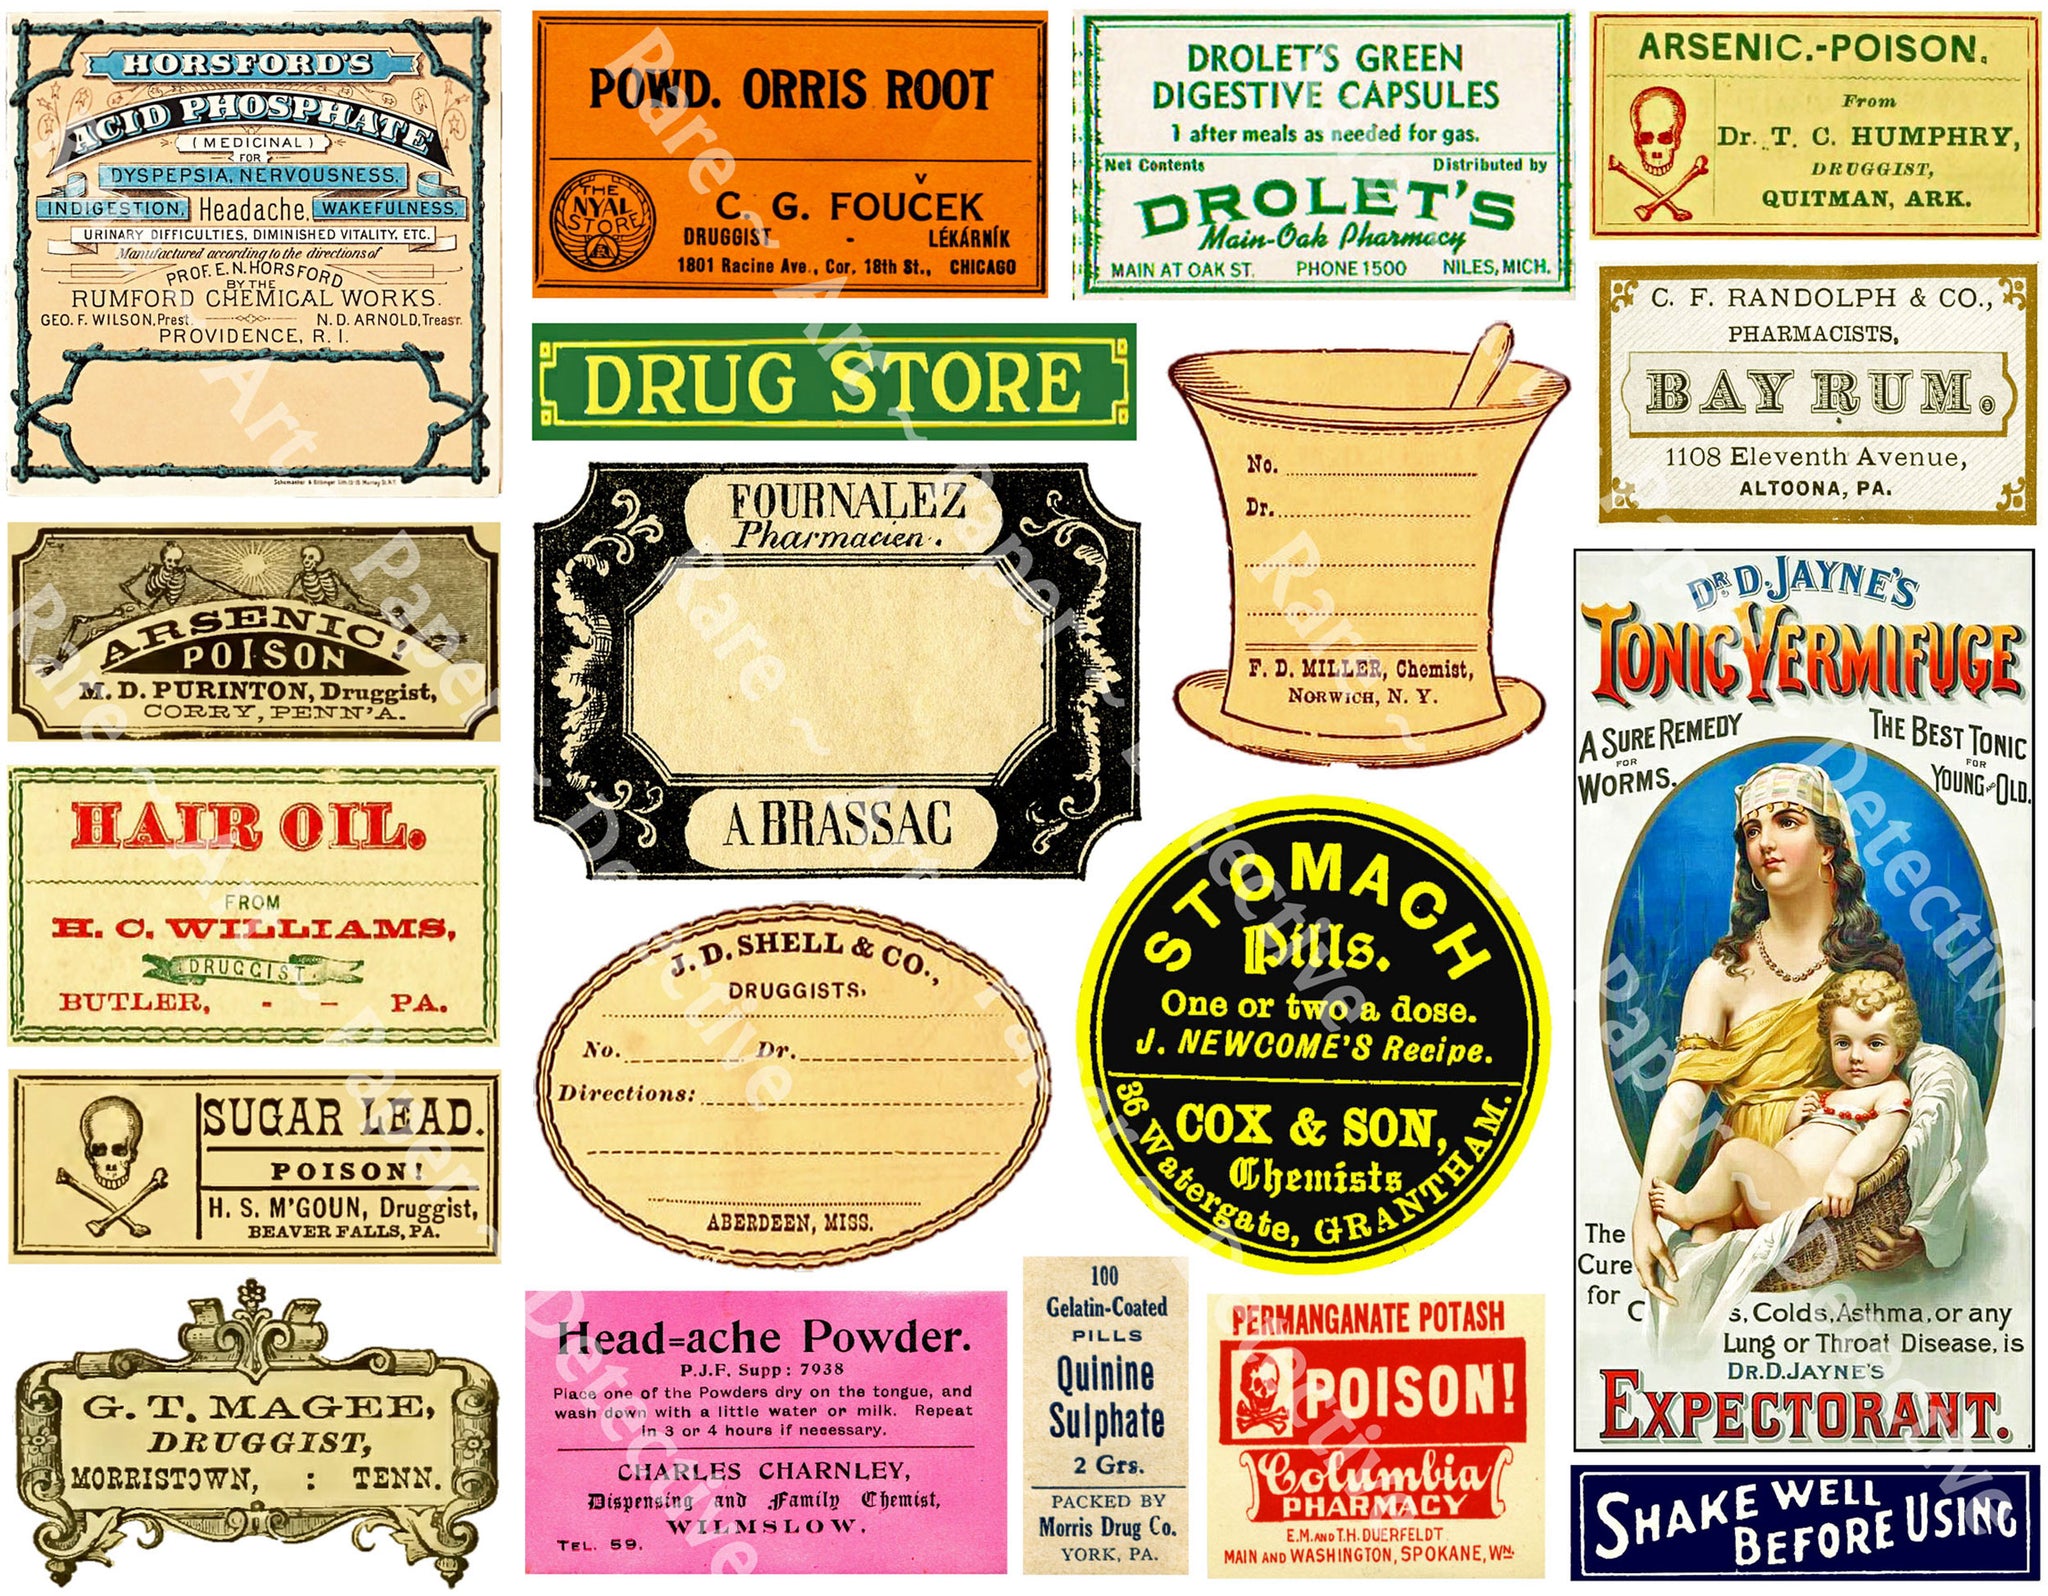 Pharmacy & Druggist Label Art Paper Stickers, Barber Shop, 17 Drug Store Signs and Curiosity Items for Bathroom Décor and Junk Journals, 889